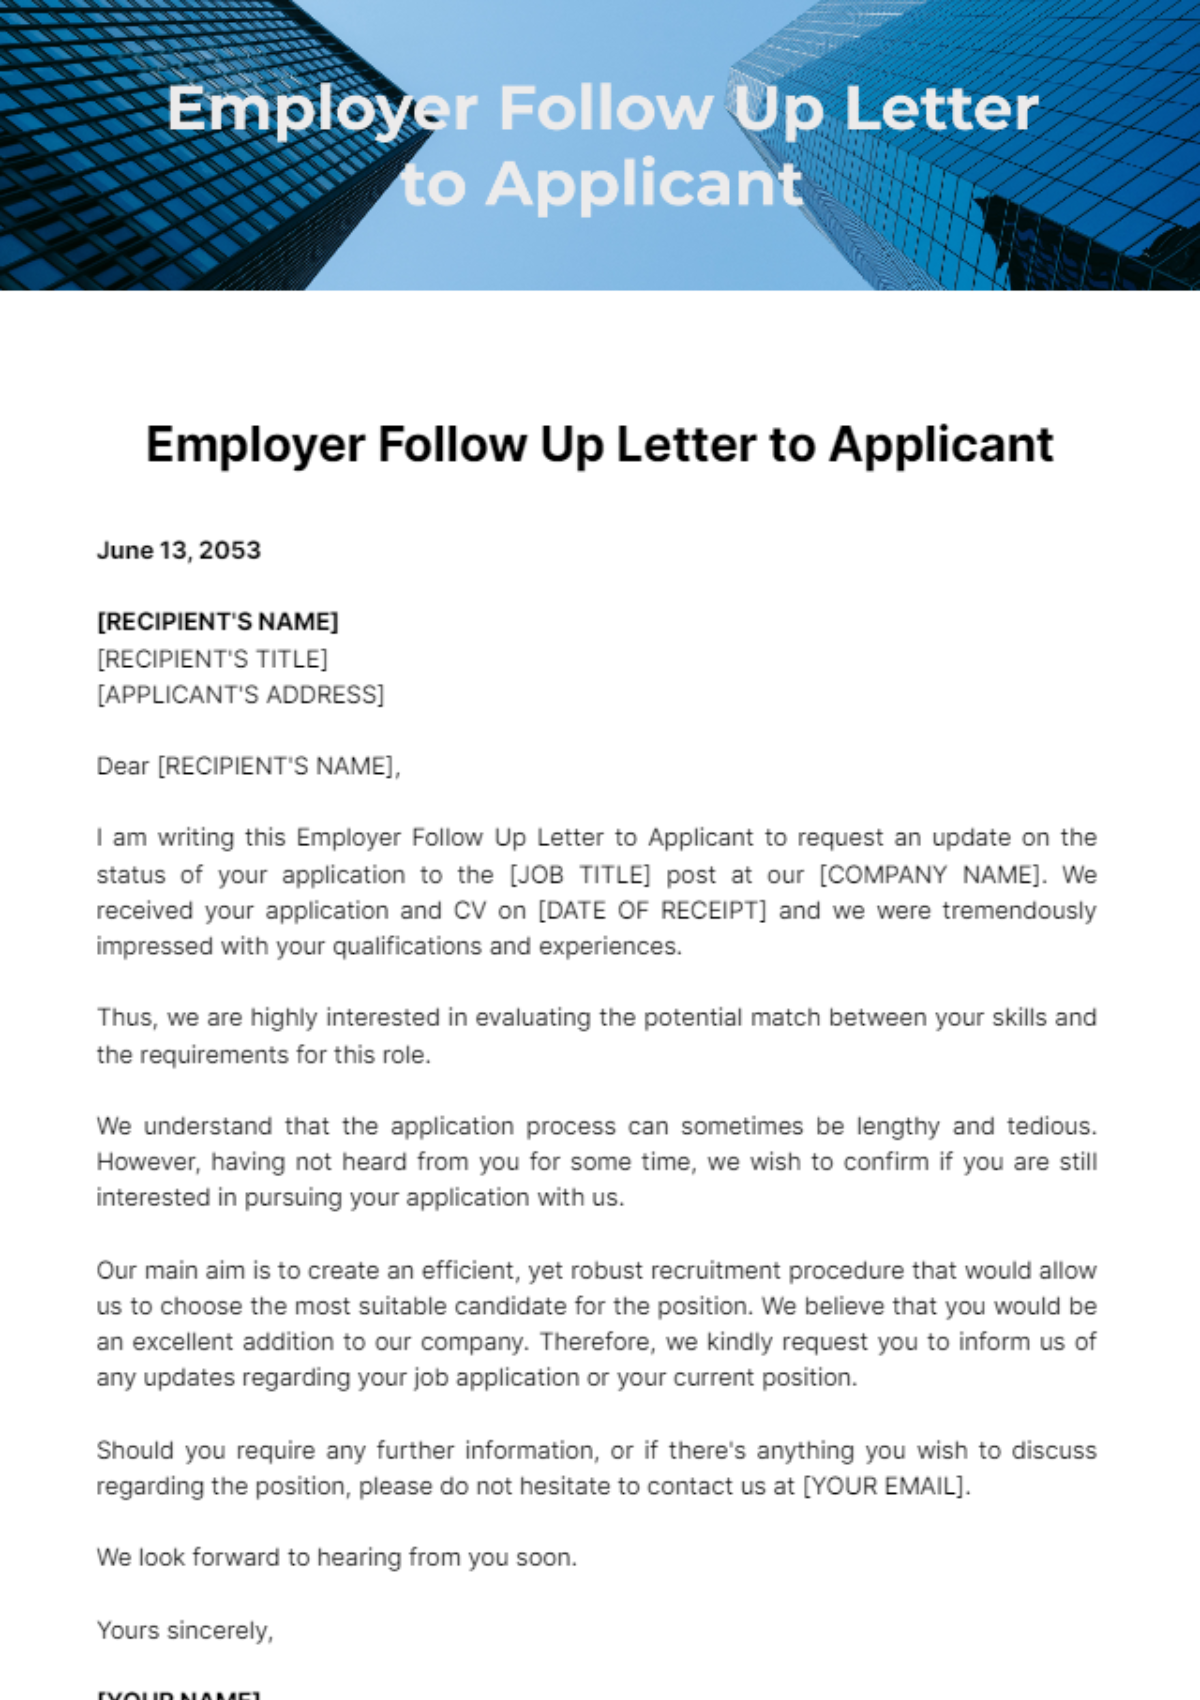 Free Employer Follow Up Letter to Applicant Template